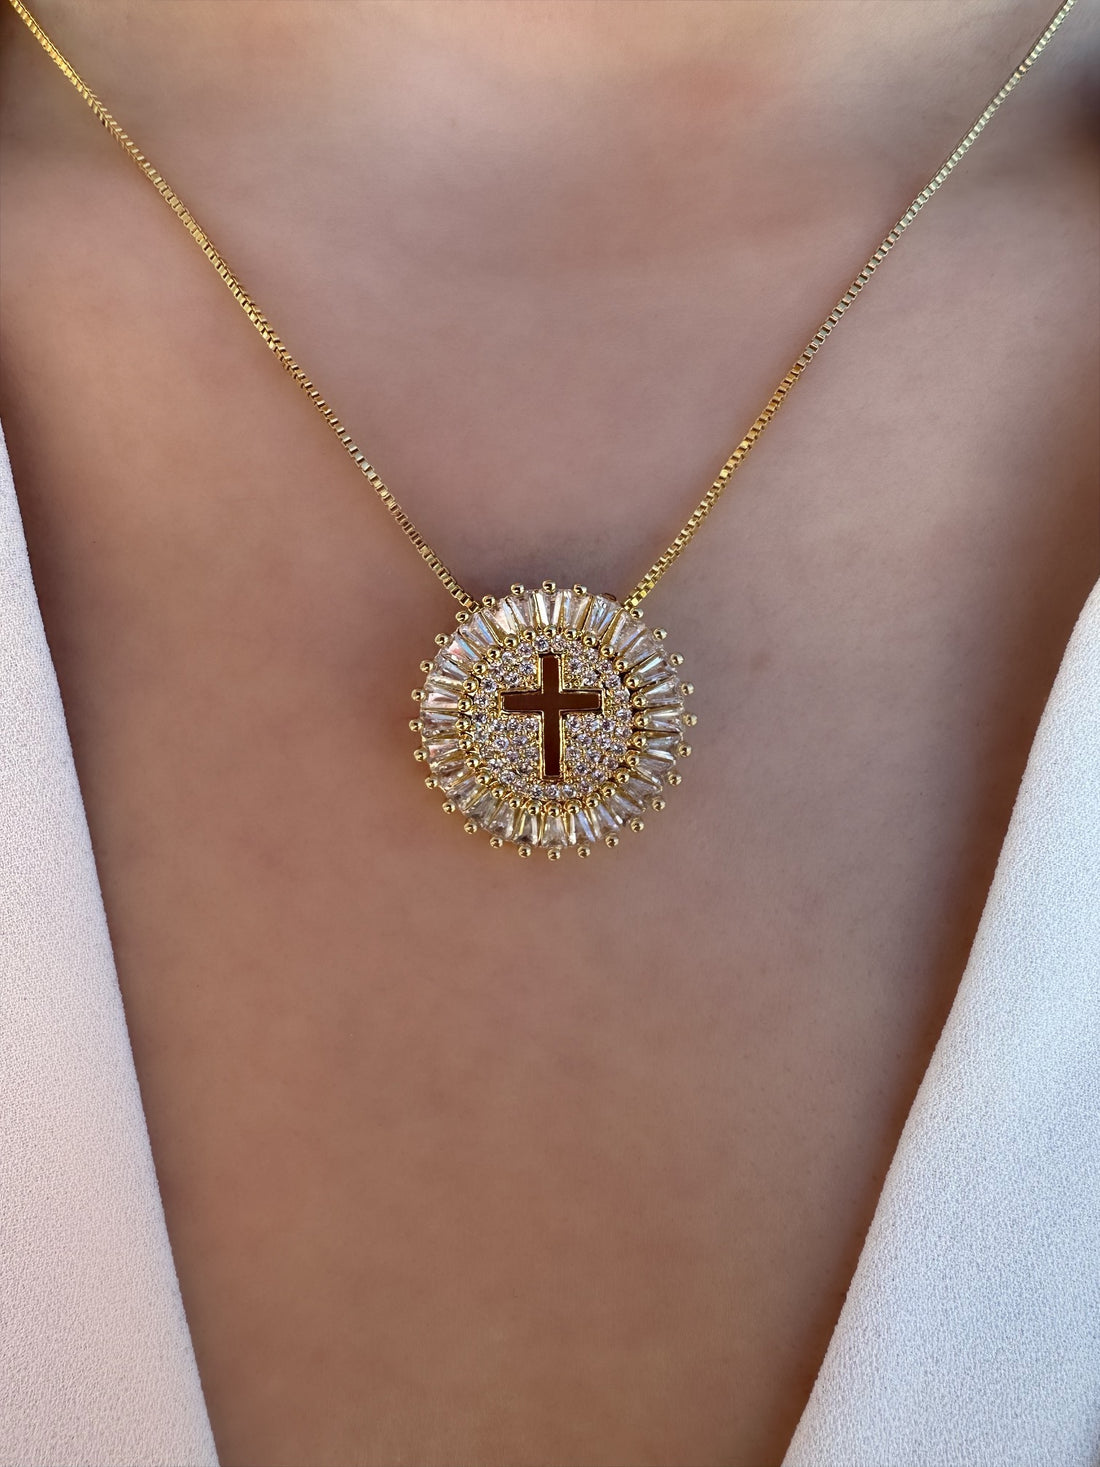 dainty cross necklace, gold cross necklace, religious necklace, gold necklace, christian jewelry, catholic jewelry, christian gifts, catholic gifts, catholic gift for her, first communion gift, baptism gift, wedding gift, christian wedding, bridesmade gift, diamond cross necklace